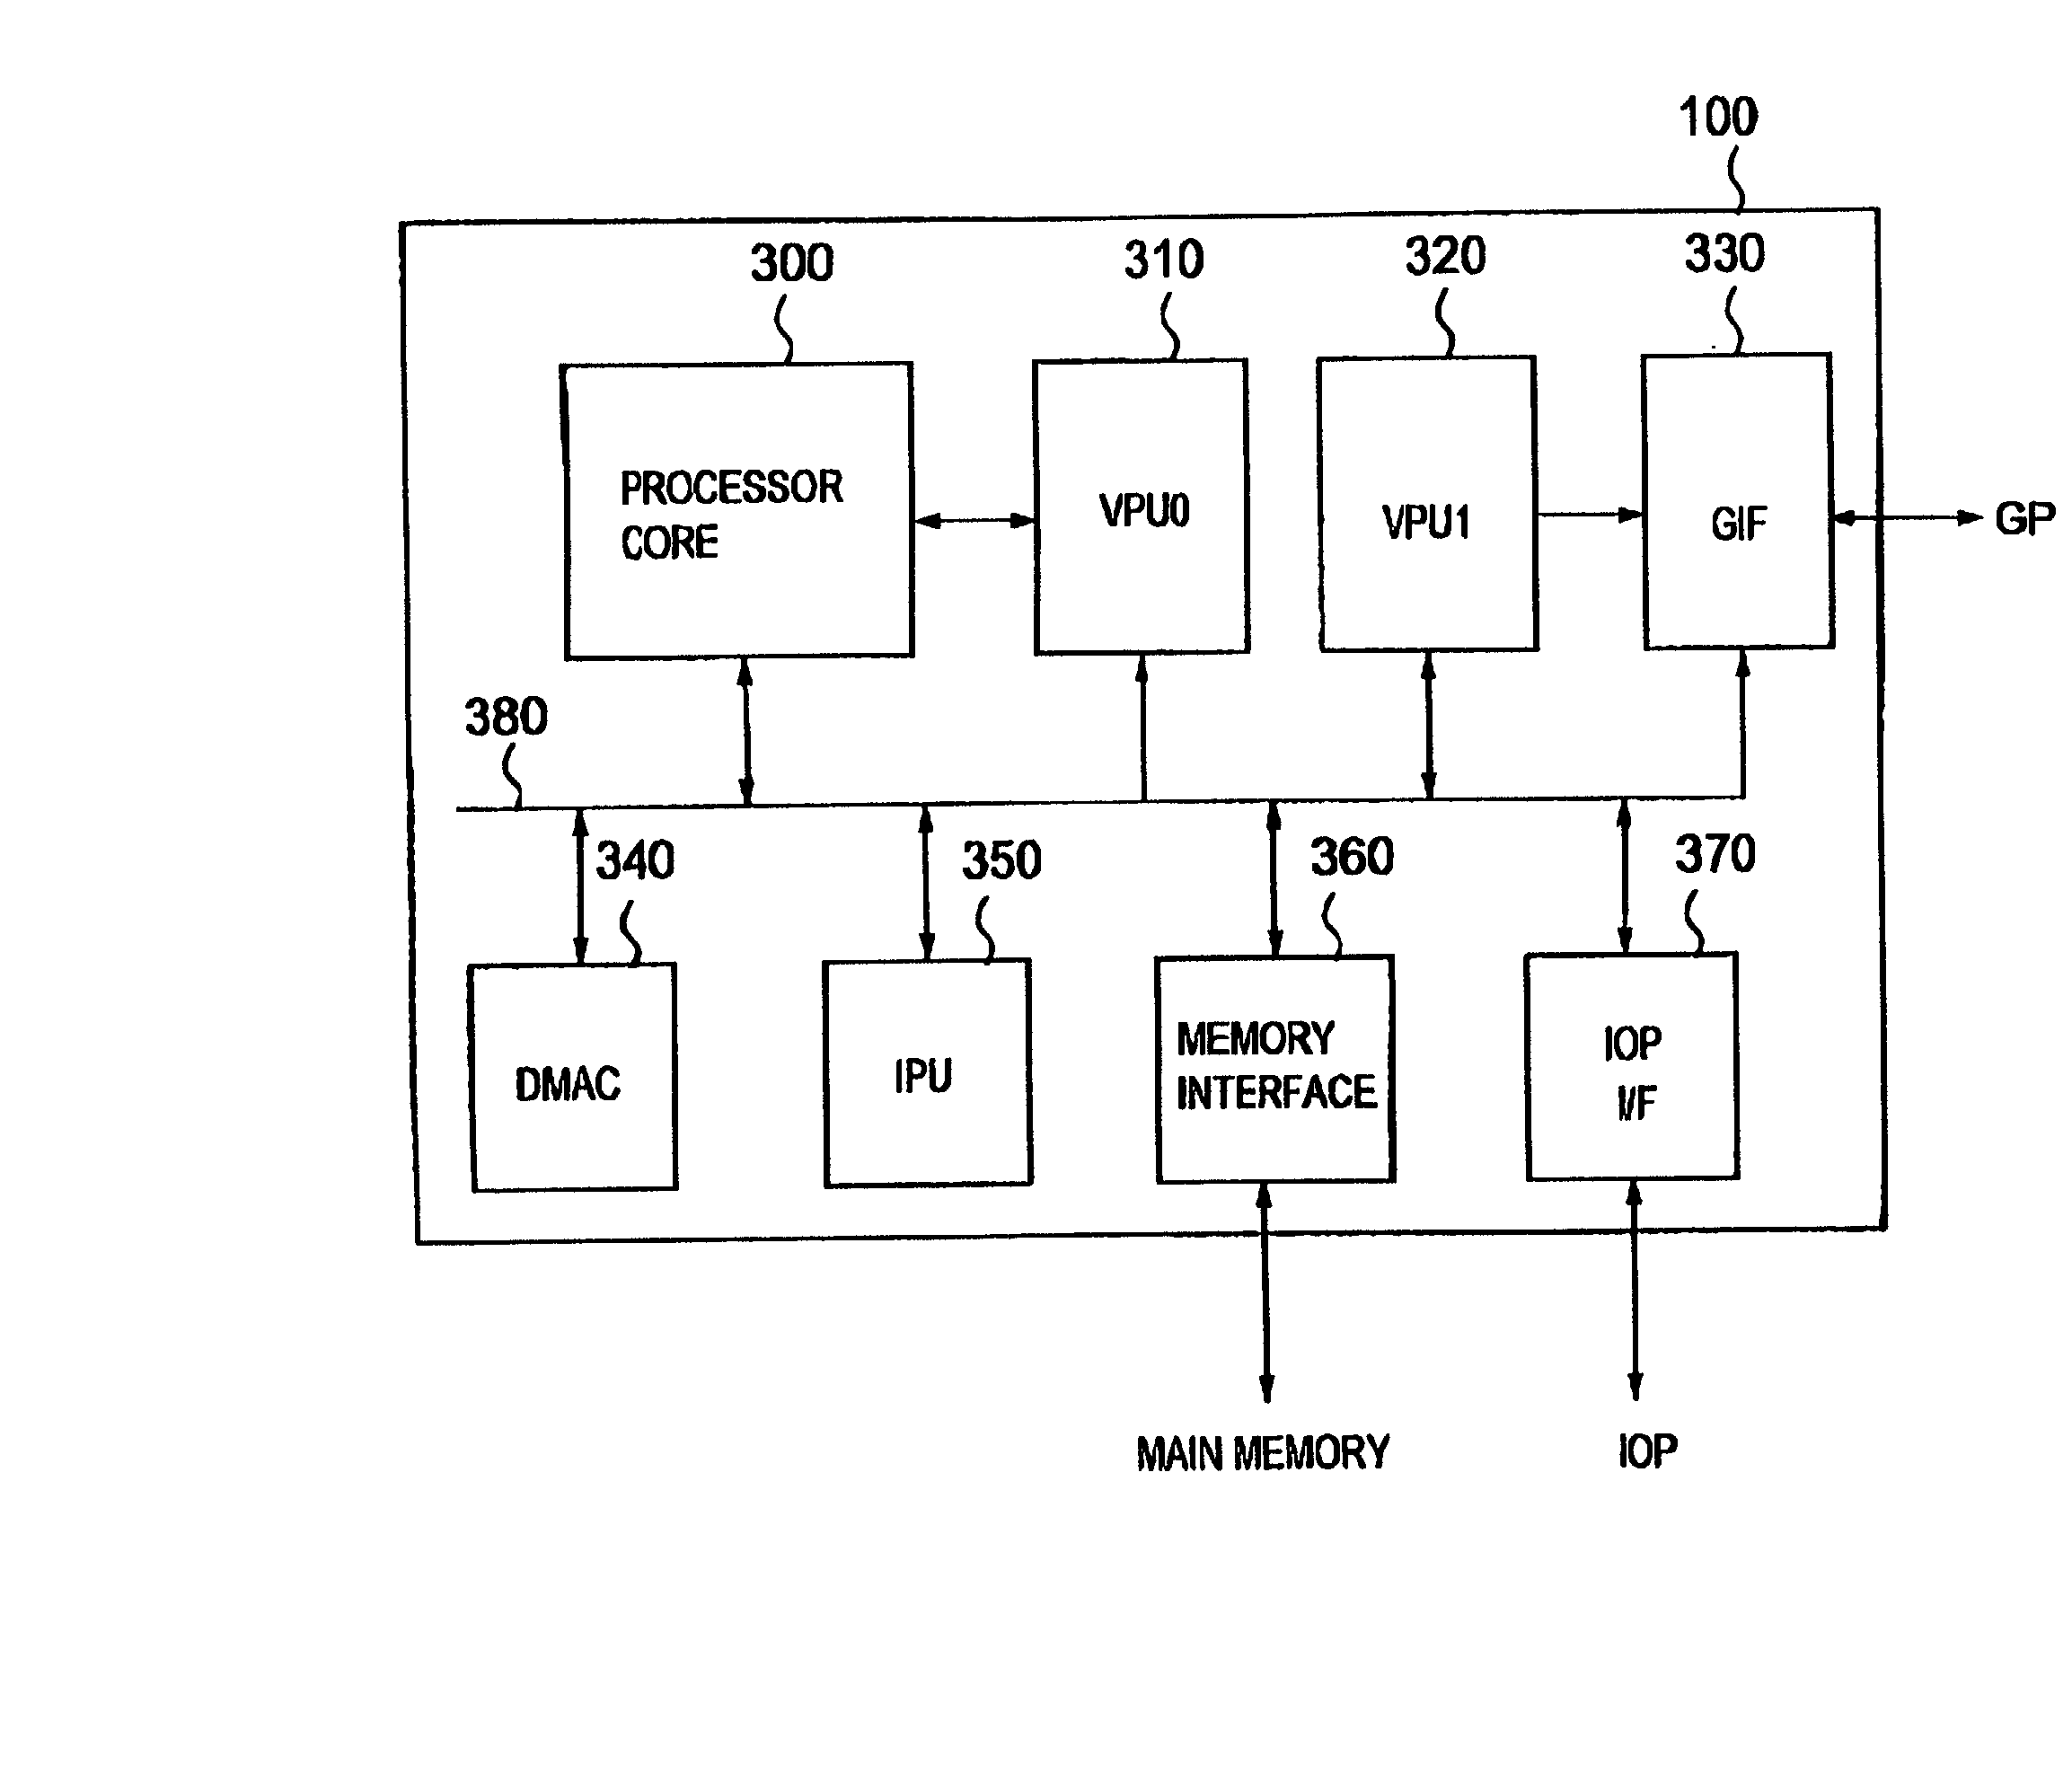 Entertainment apparatus having compatibility and computer system